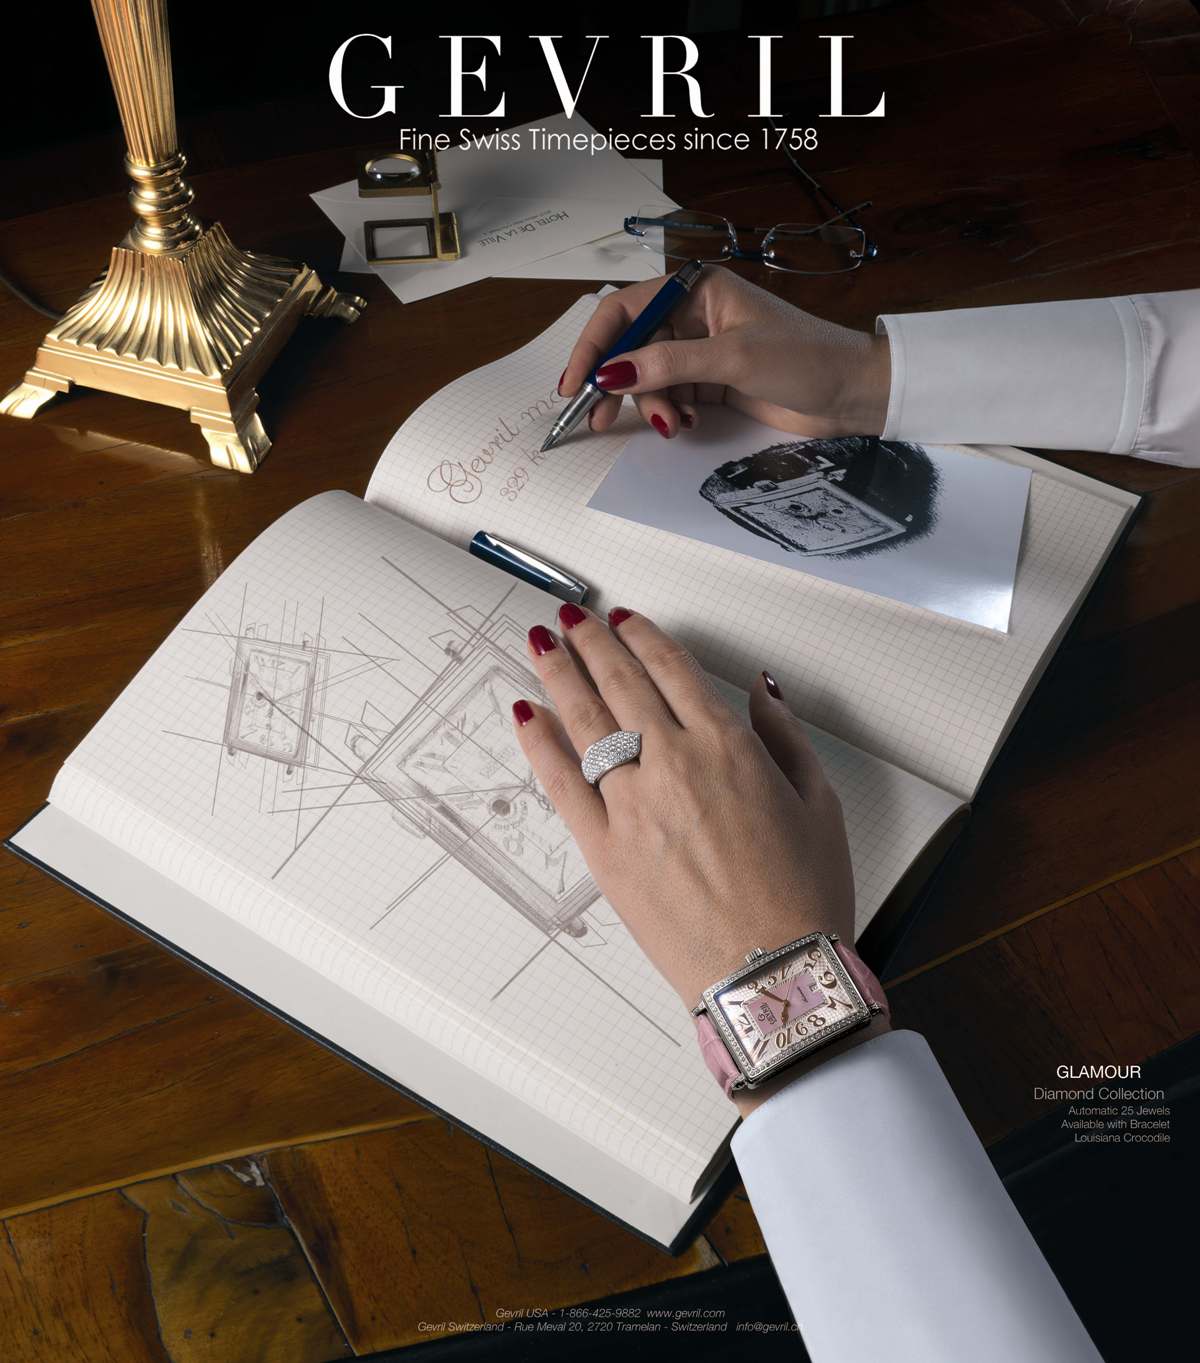 Invitation to the Gevril Watch Exhibit, March 8-14, 2012 at Baselworld 2012, Hall 1.1, Booth A-13